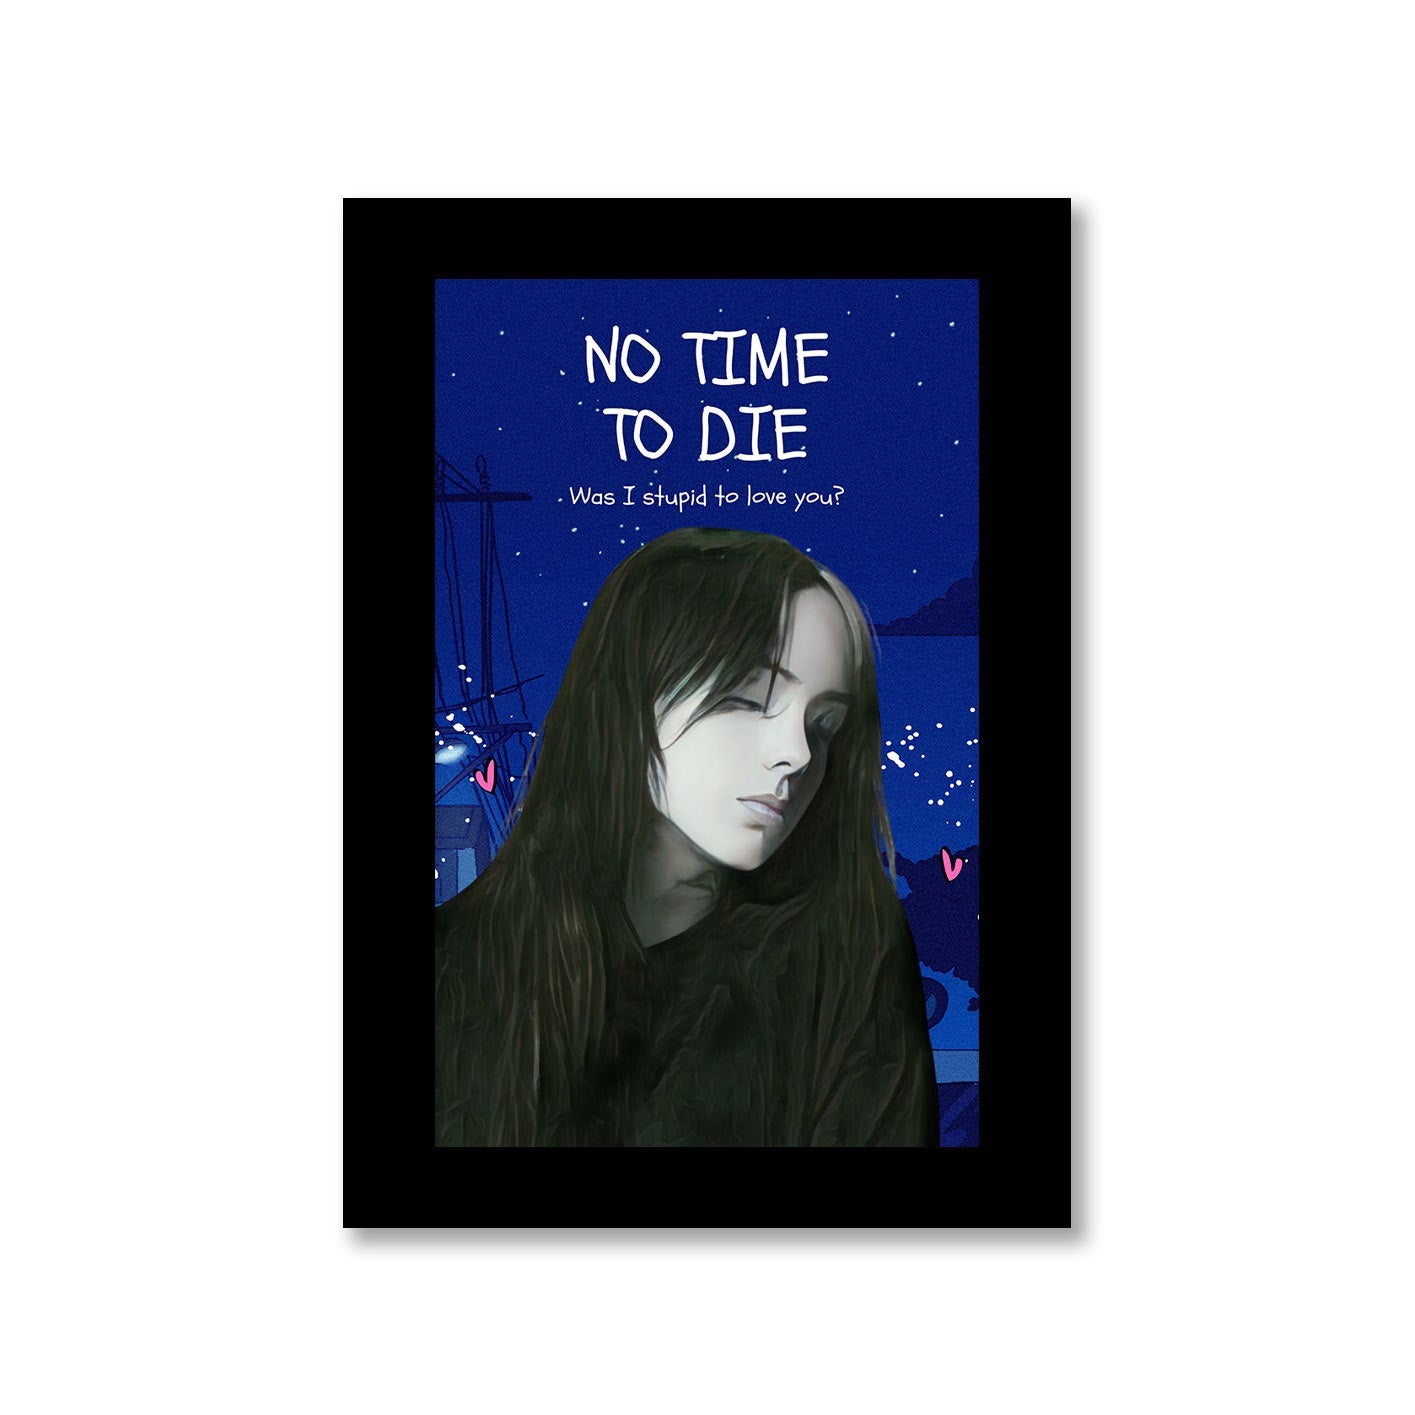 billie eilish no time to die poster wall art buy online india the banyan tee tbt a4